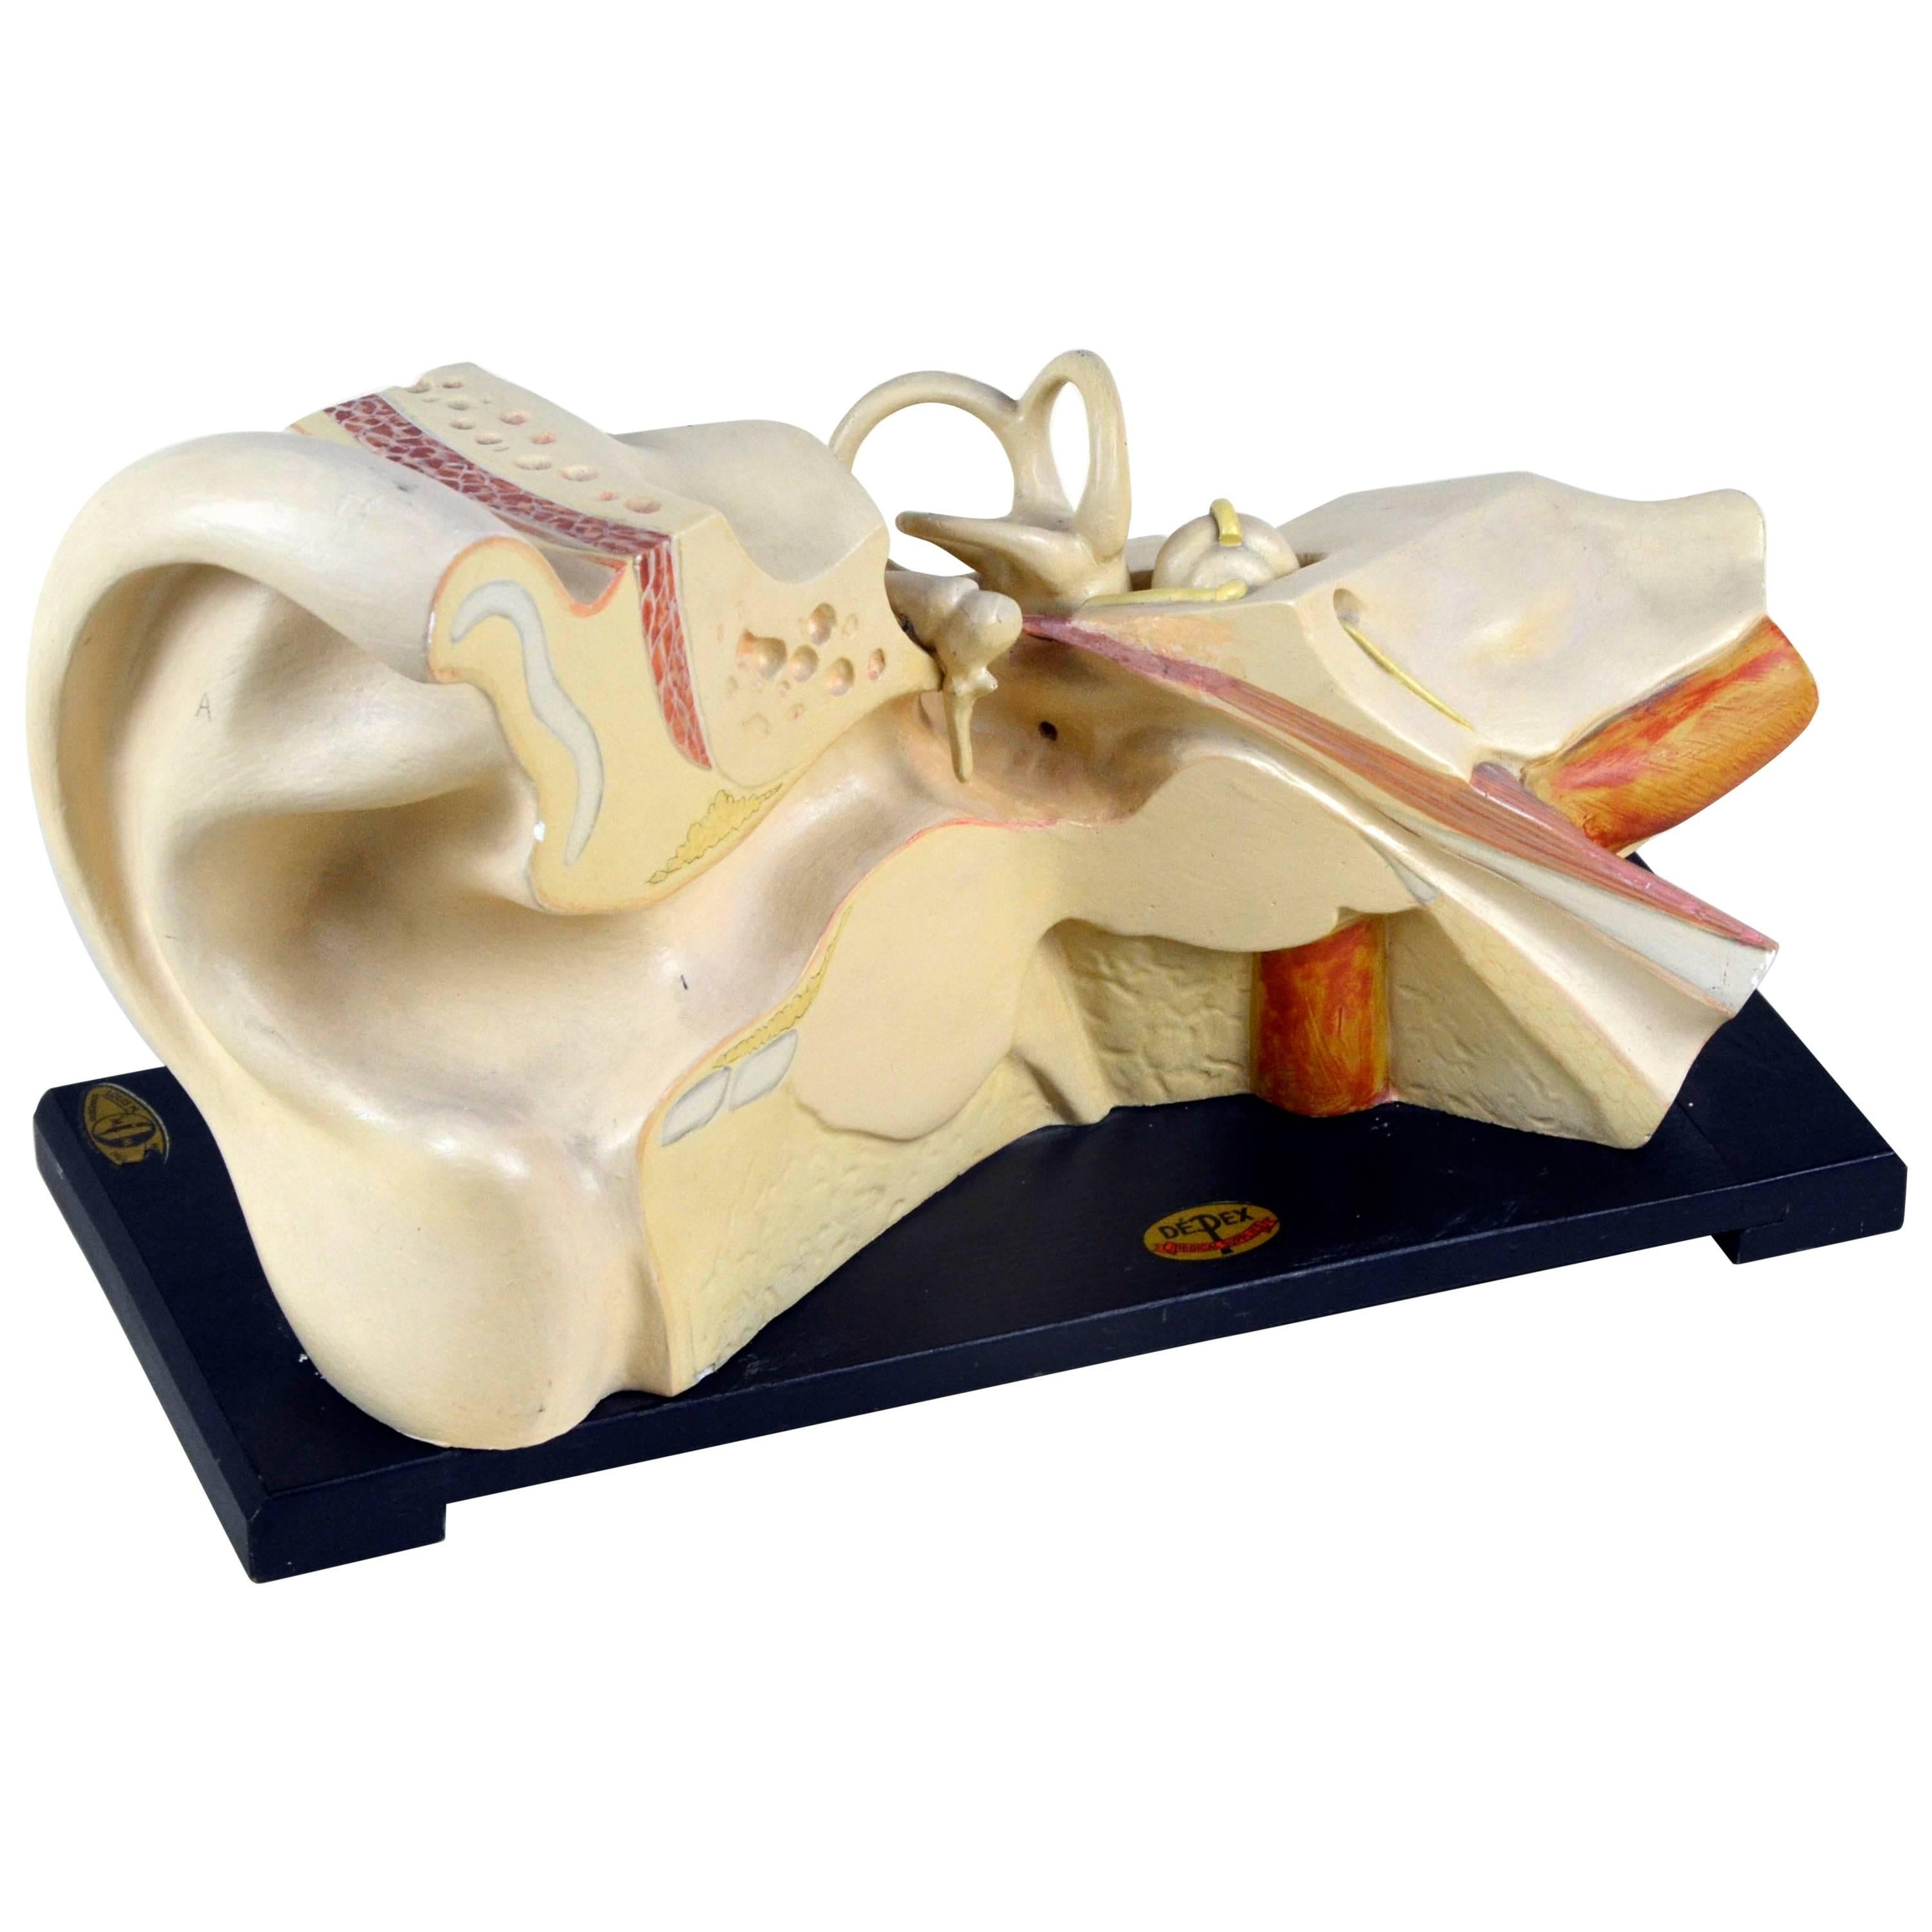 1930s Vintage Anatomical Ear Model in Plaster and Wood from Germany For Sale